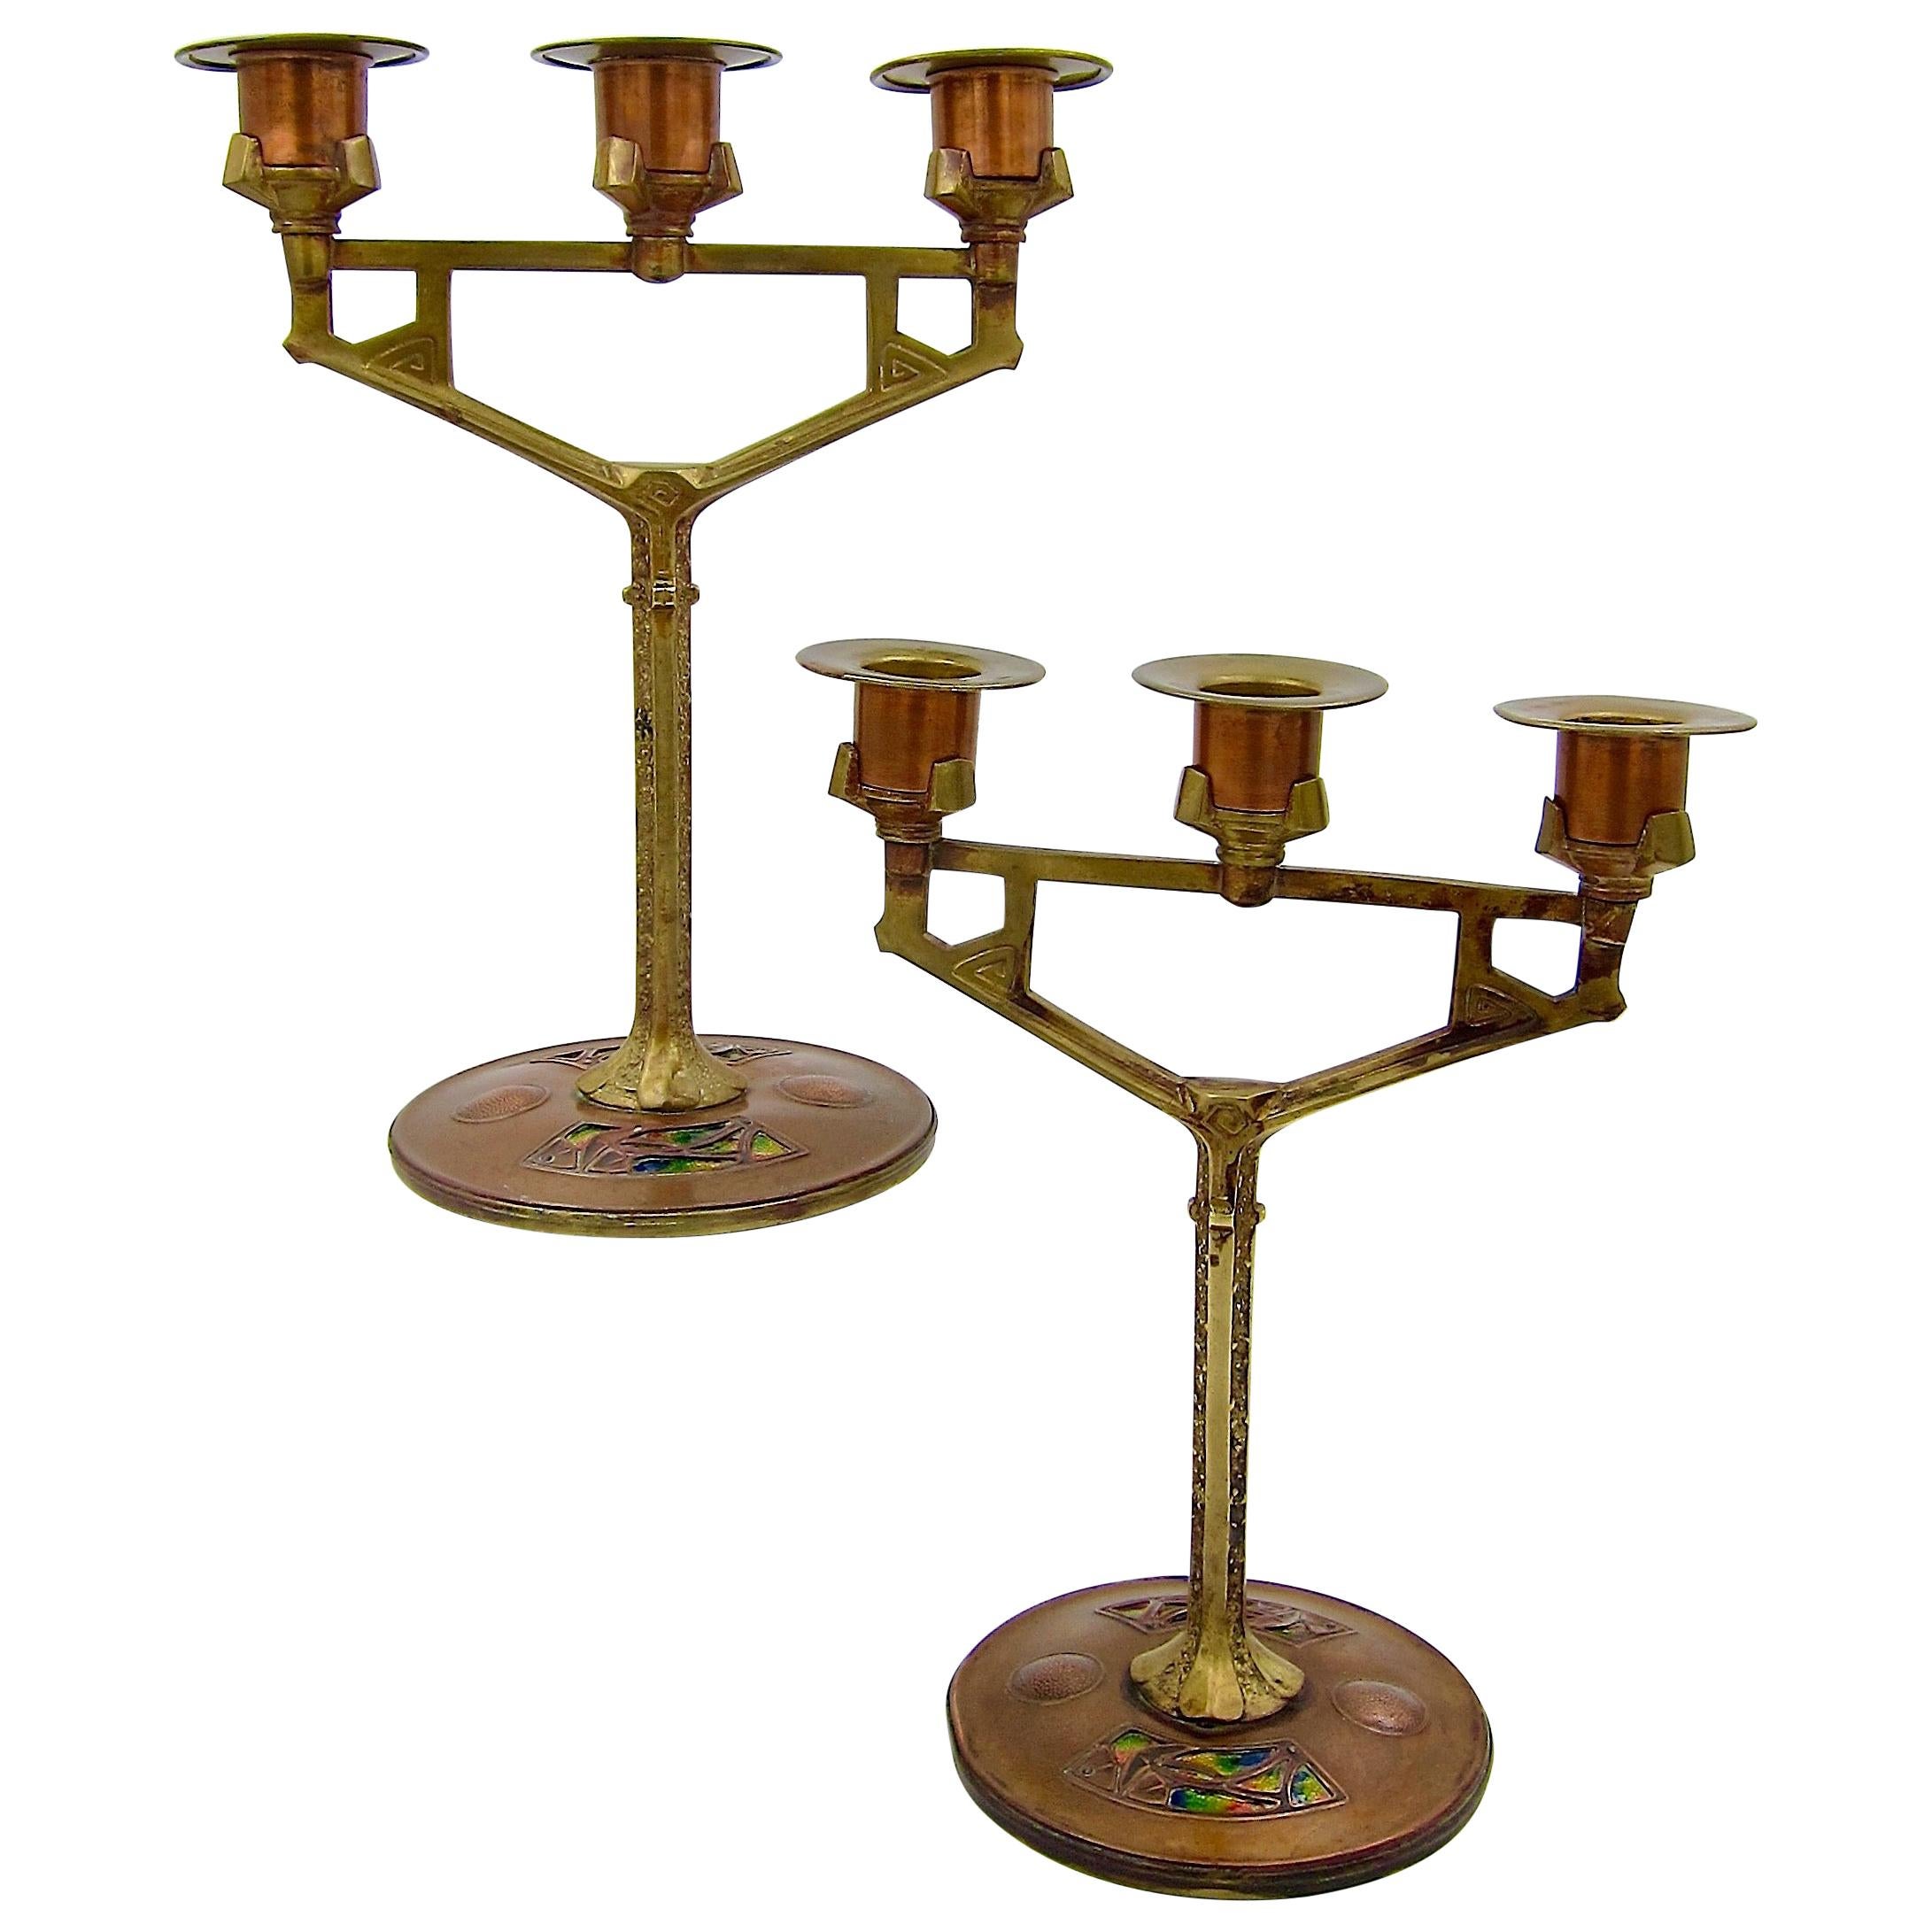 Secessionist Mixed Metal Candle Holder Pair in Enameled Copper and Brass